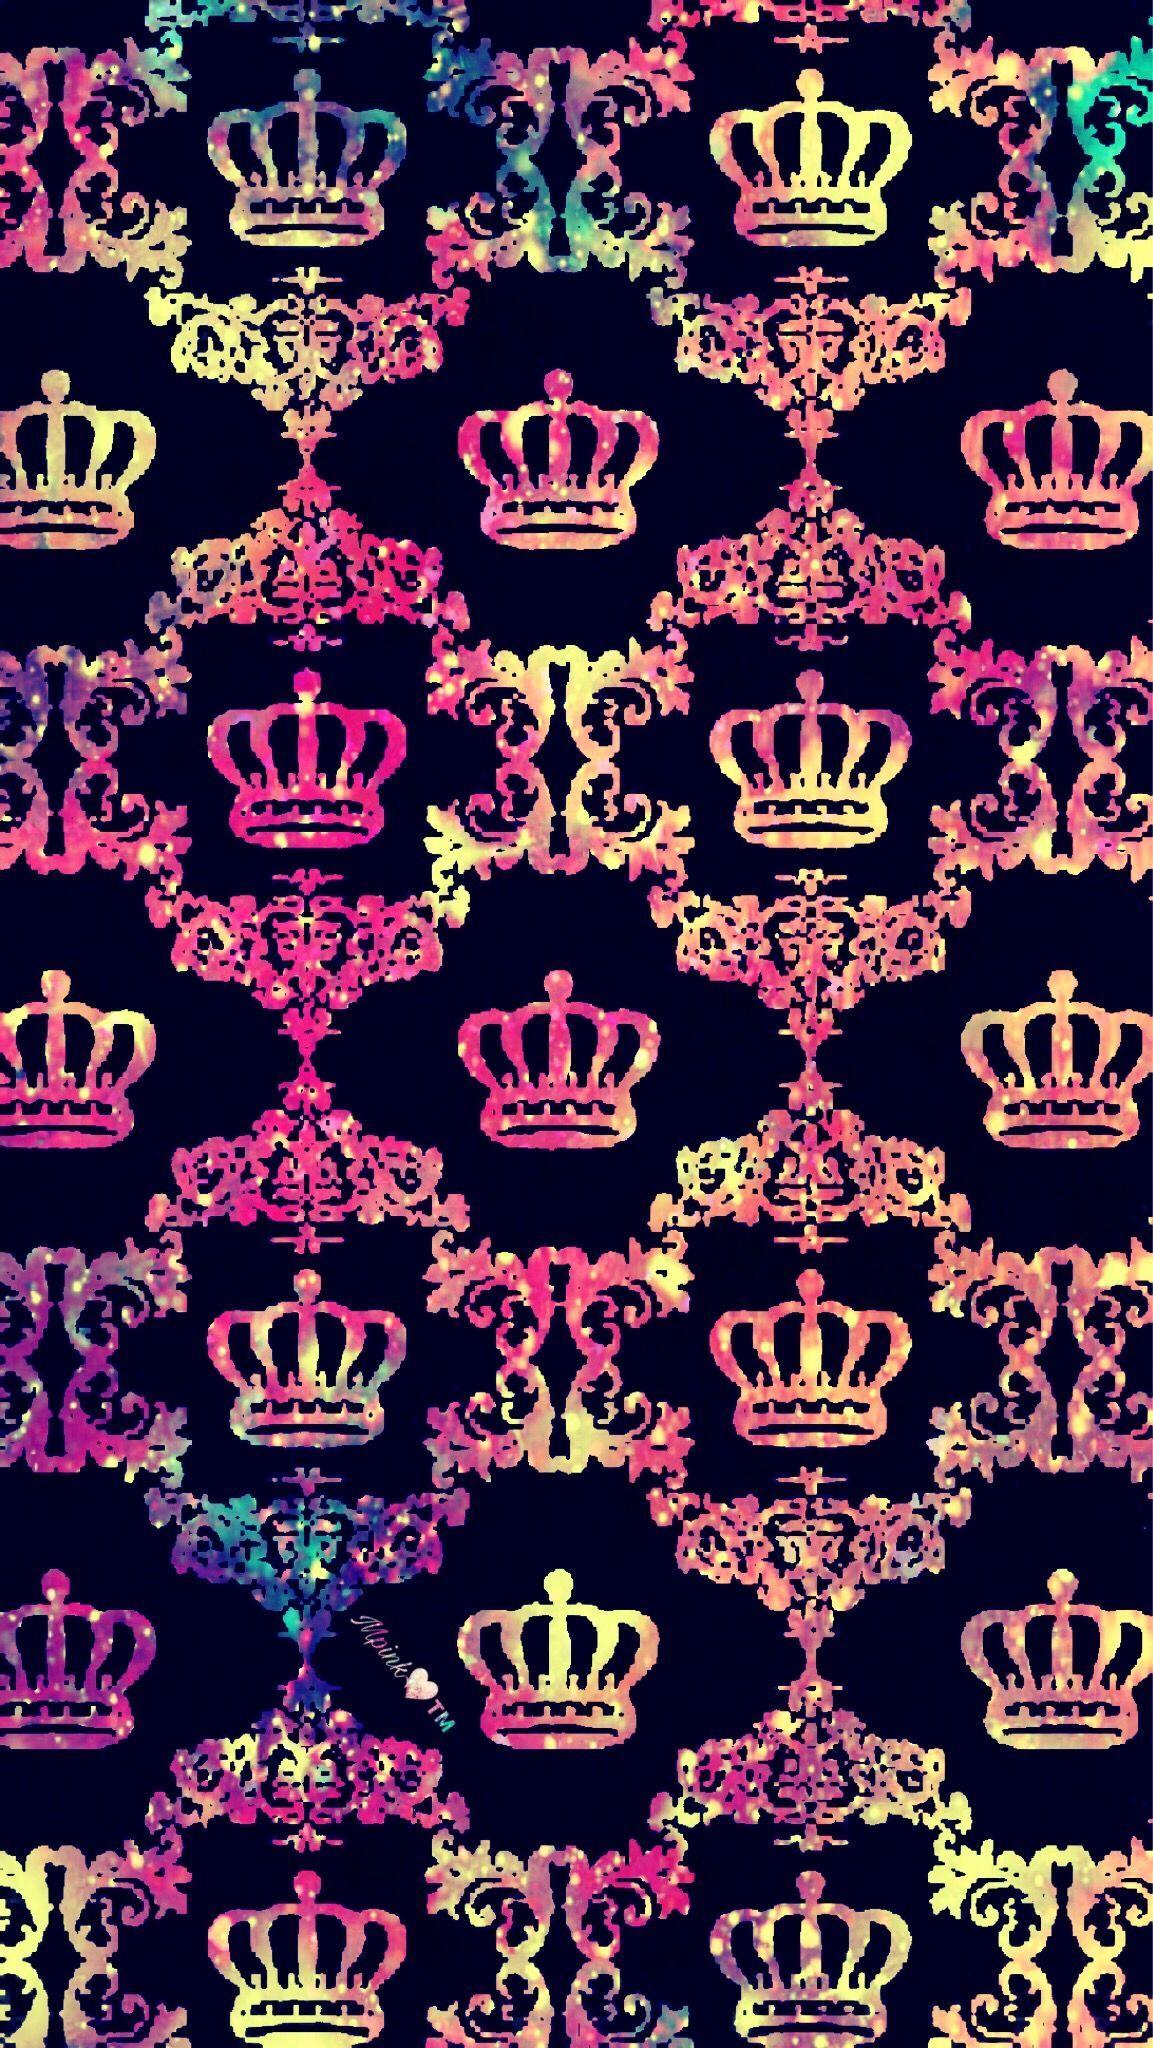 100+] King And Queen Wallpapers | Wallpapers.com